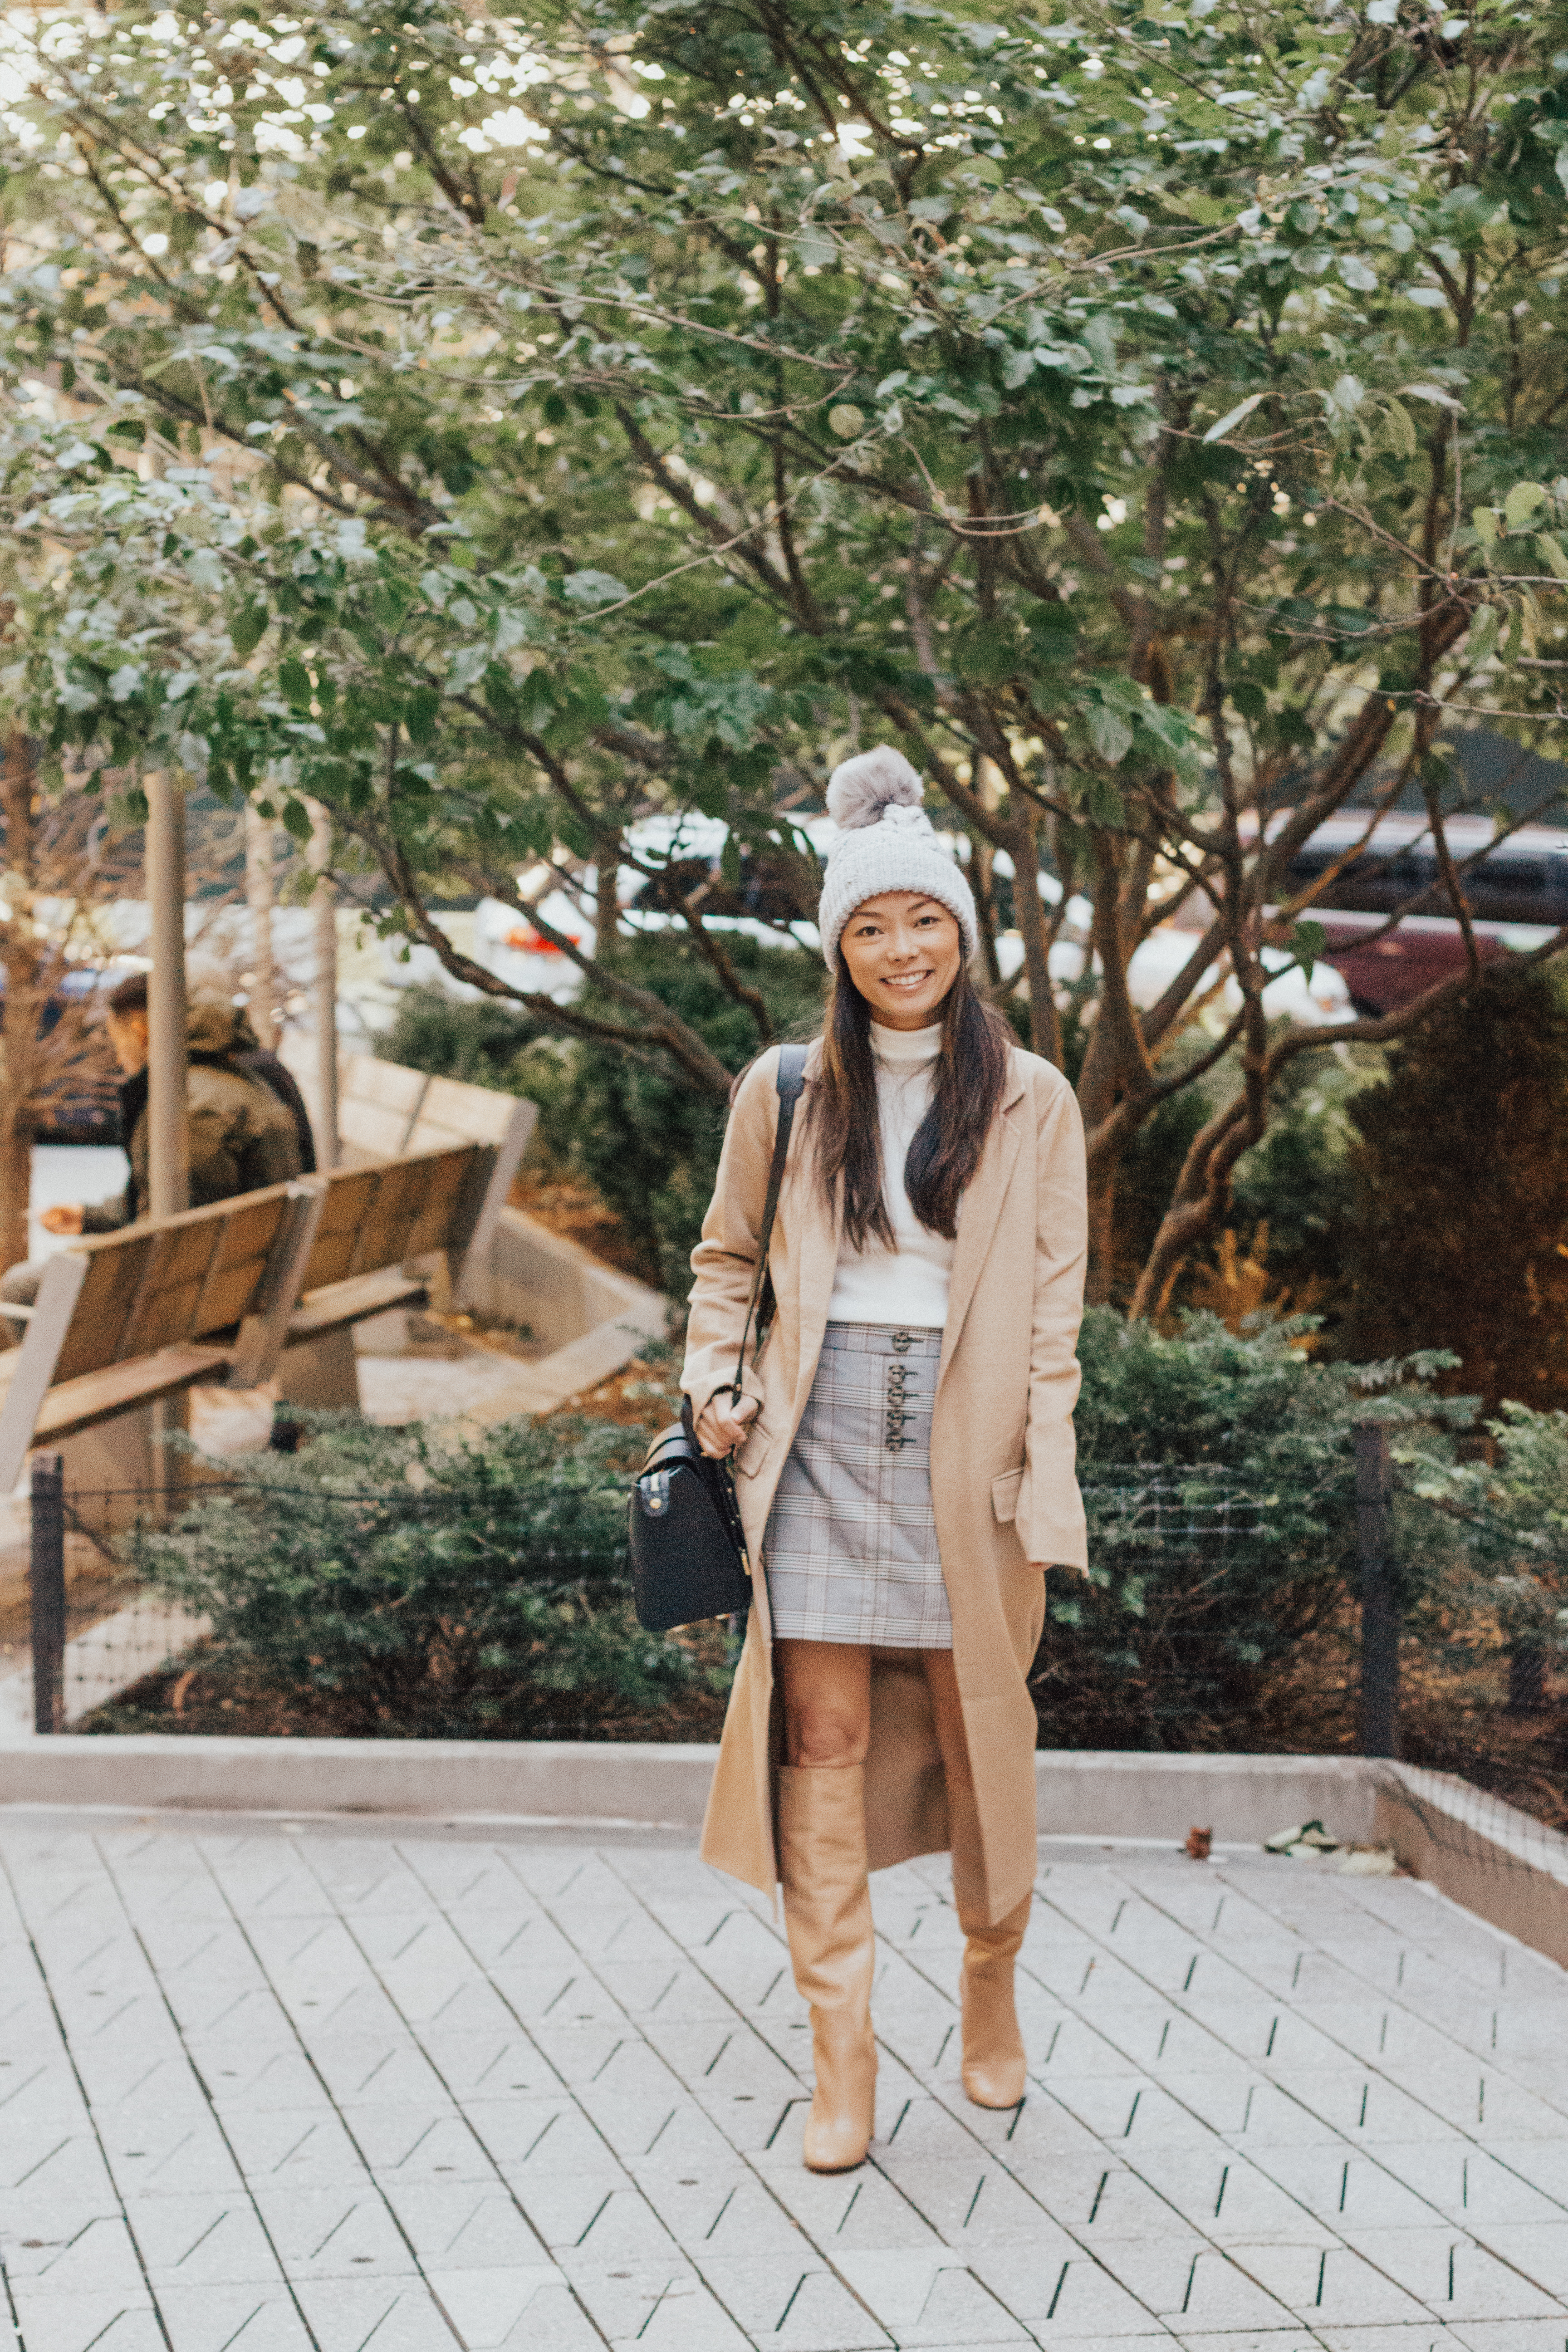 express, express holiday style, plaid skirt, camel coat, winter style